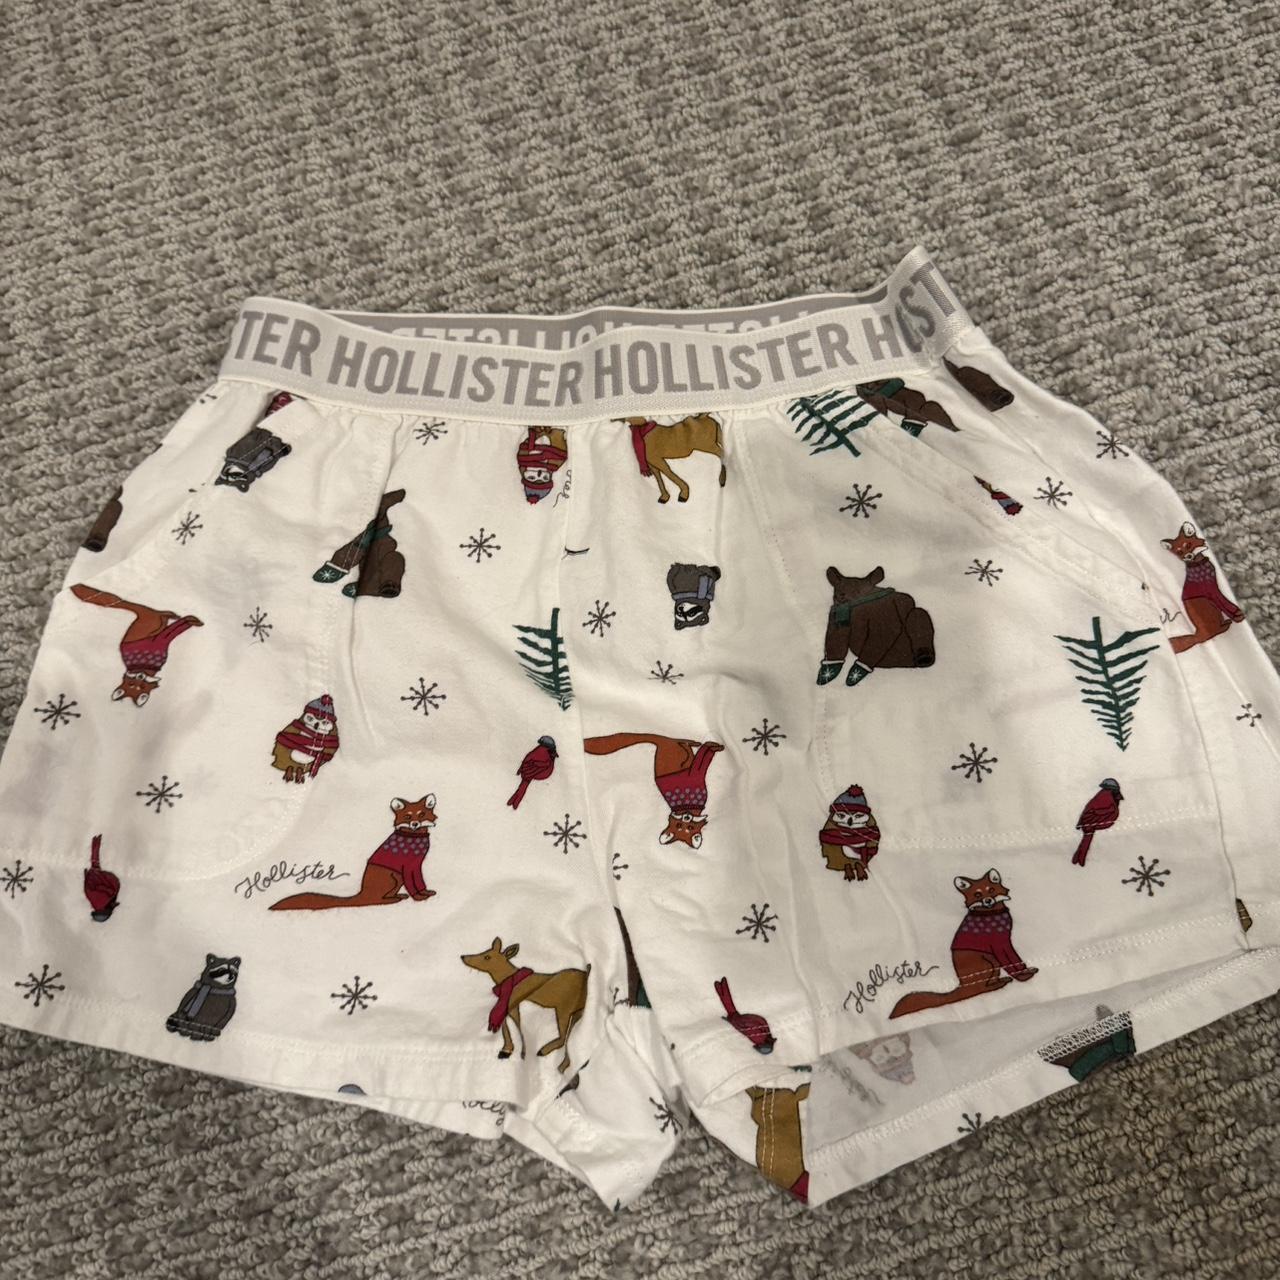 Swag Men's Boxer Briefs Ghosted Funny Halloween - Depop